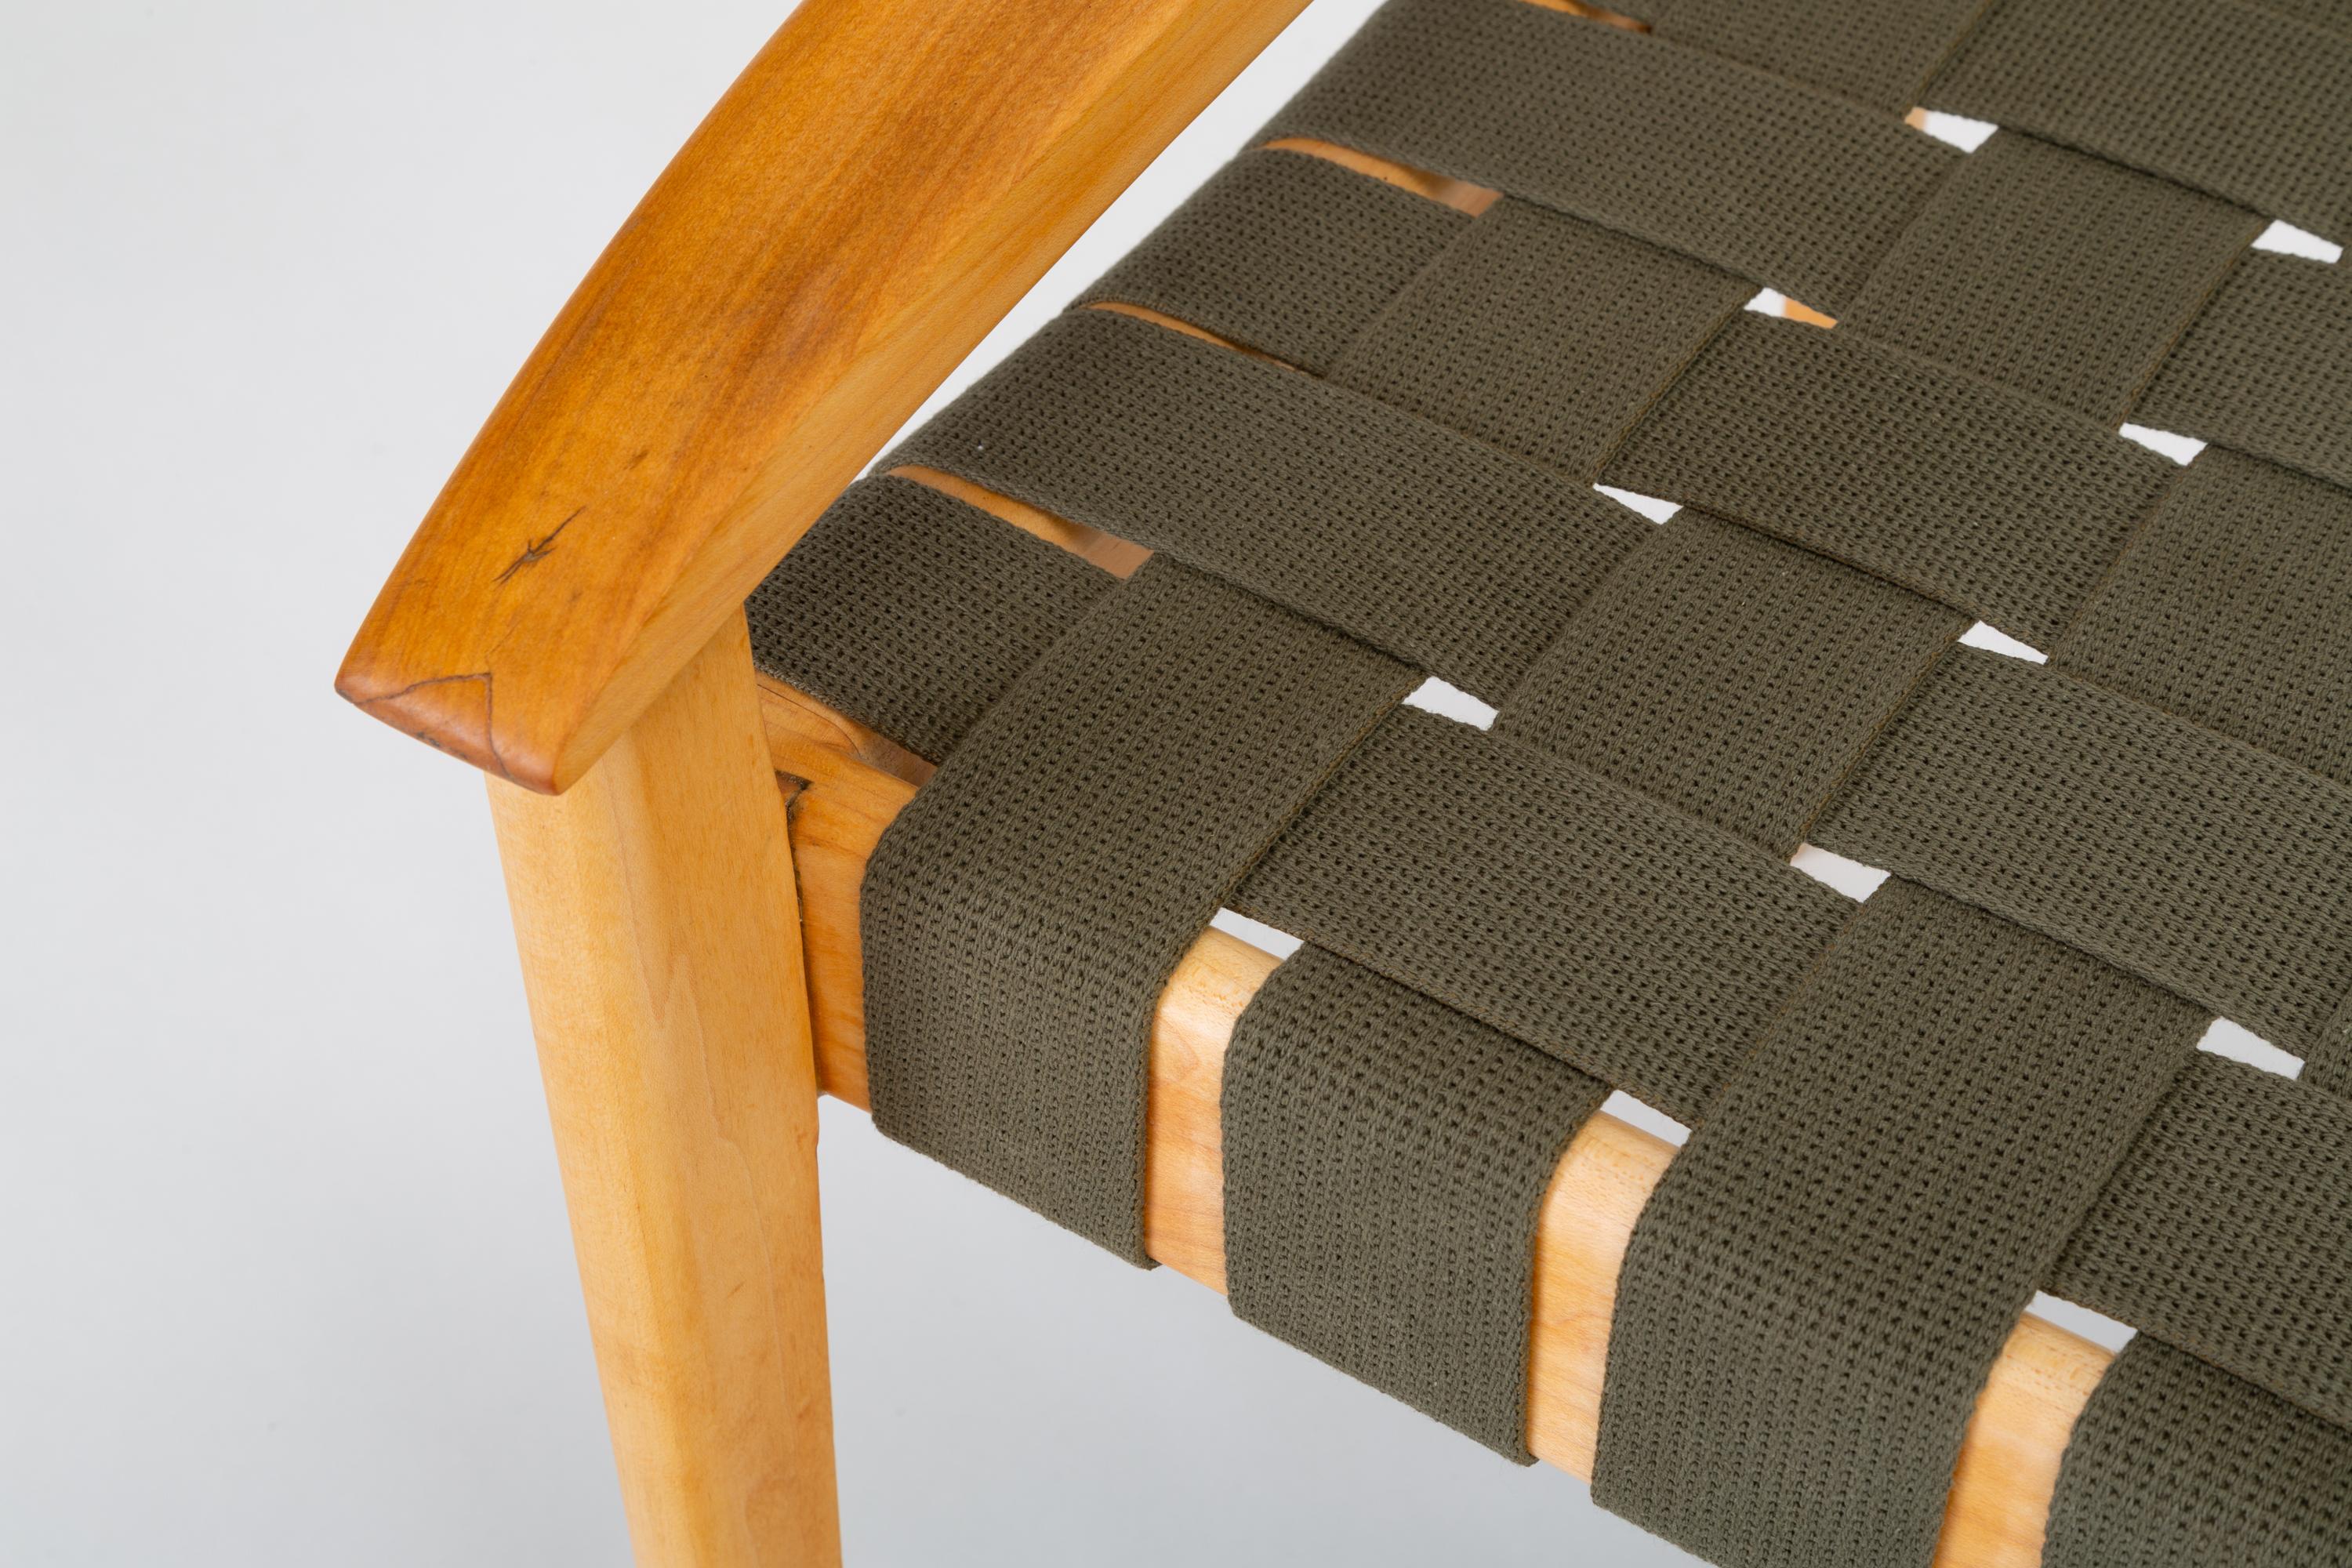 American-Made Maple Bench with Woven Seat by Tom Ghilarducci 8